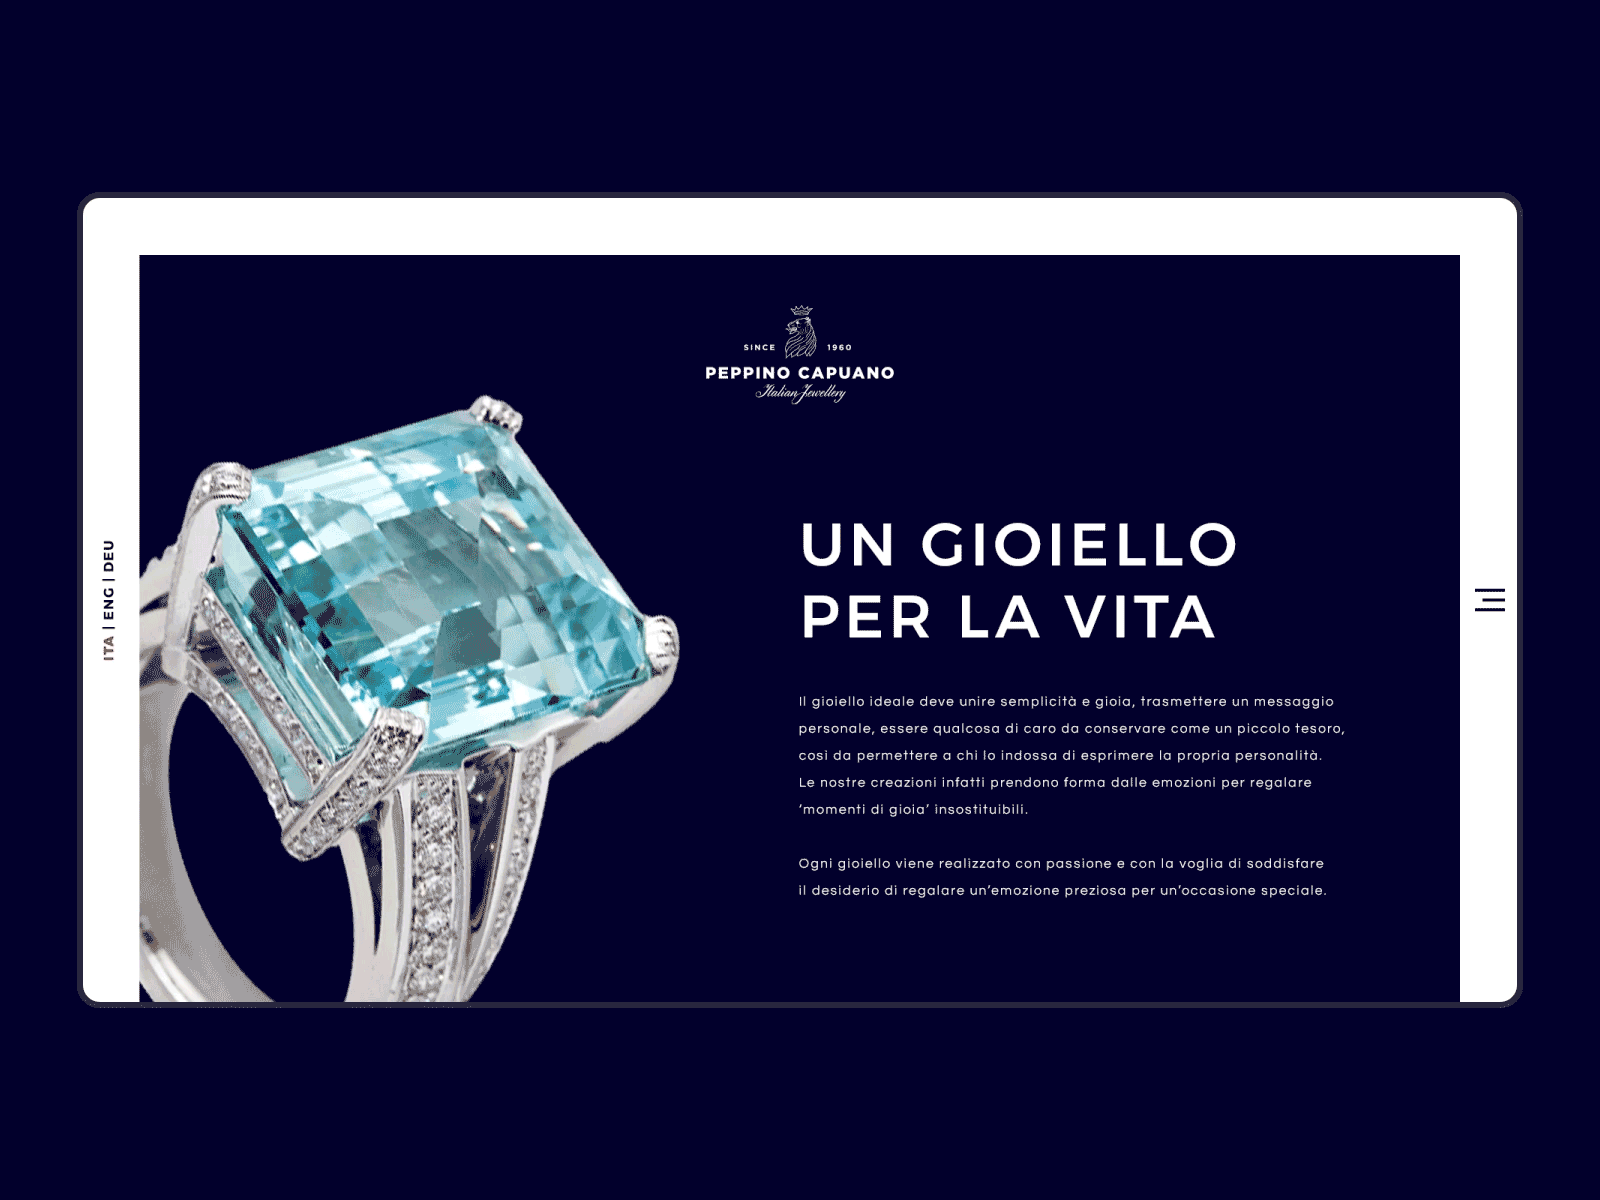 A Jewel for Life | Peppino Capuano adobe after effect adobe aftereffects animated mockup animation graphic design interaction design responsive design thanatos digital agency ui ui ux design uiux user inteface user interface design web design web mockup website design website mockup websites